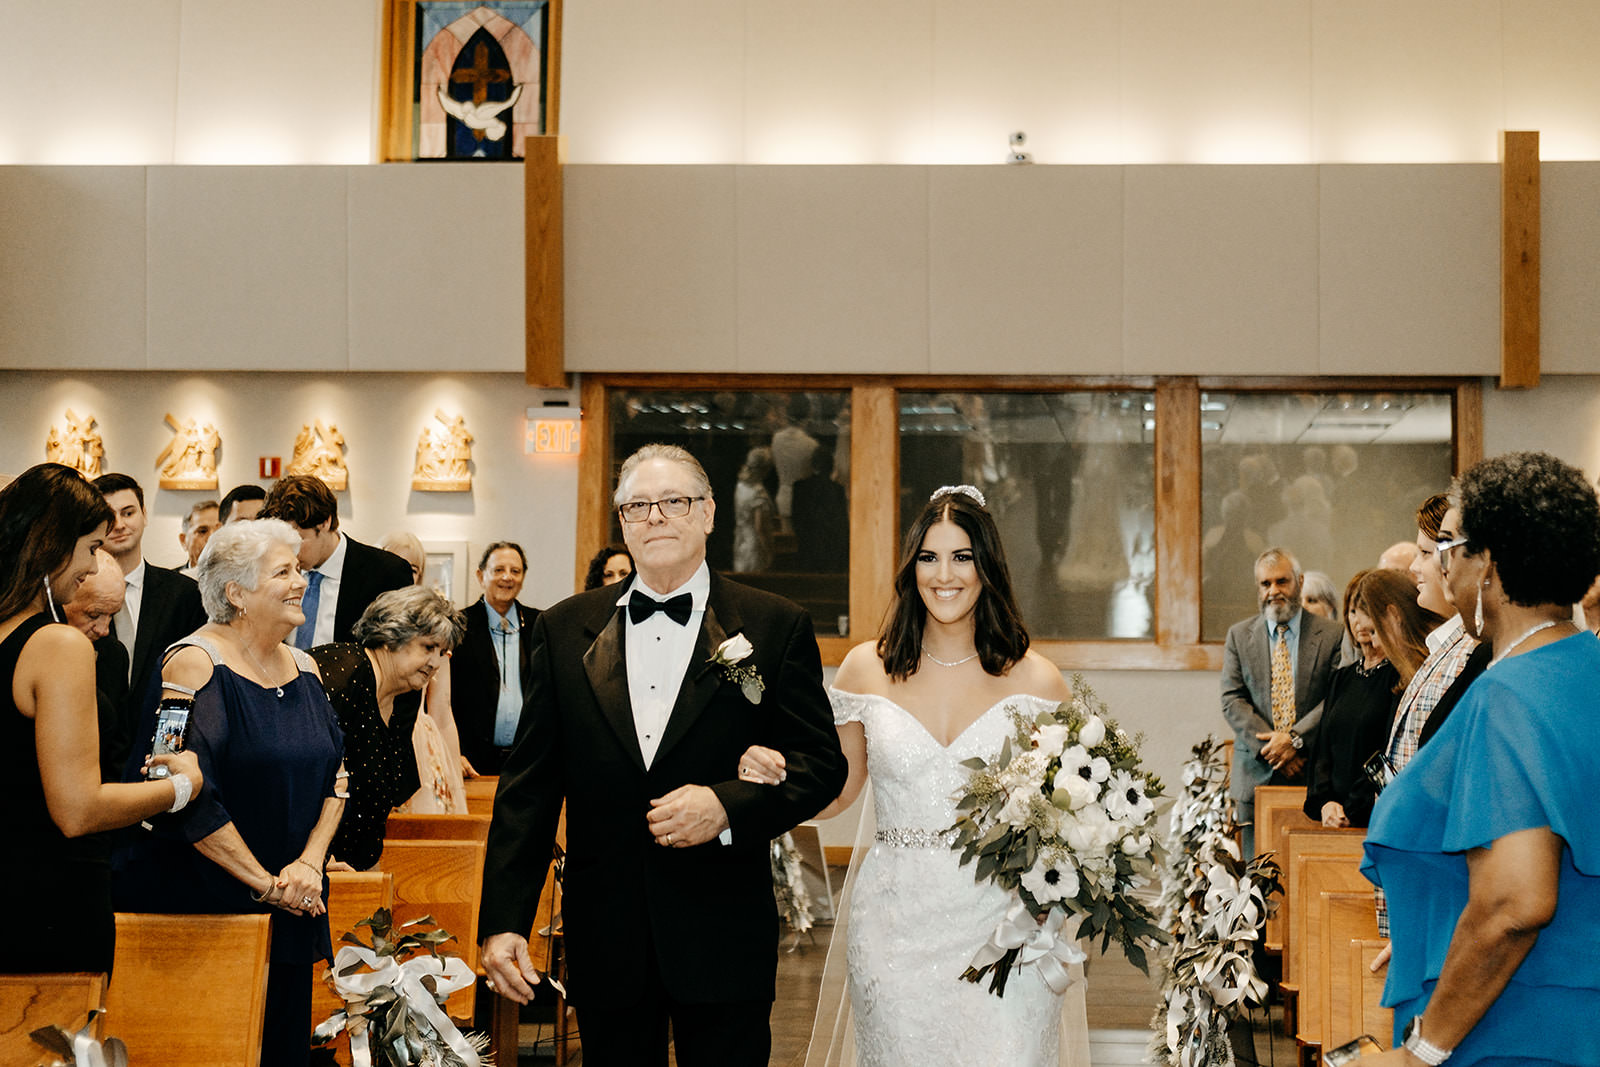 Father of the Bride Walks Bride Down the Aisle in Church Wedding